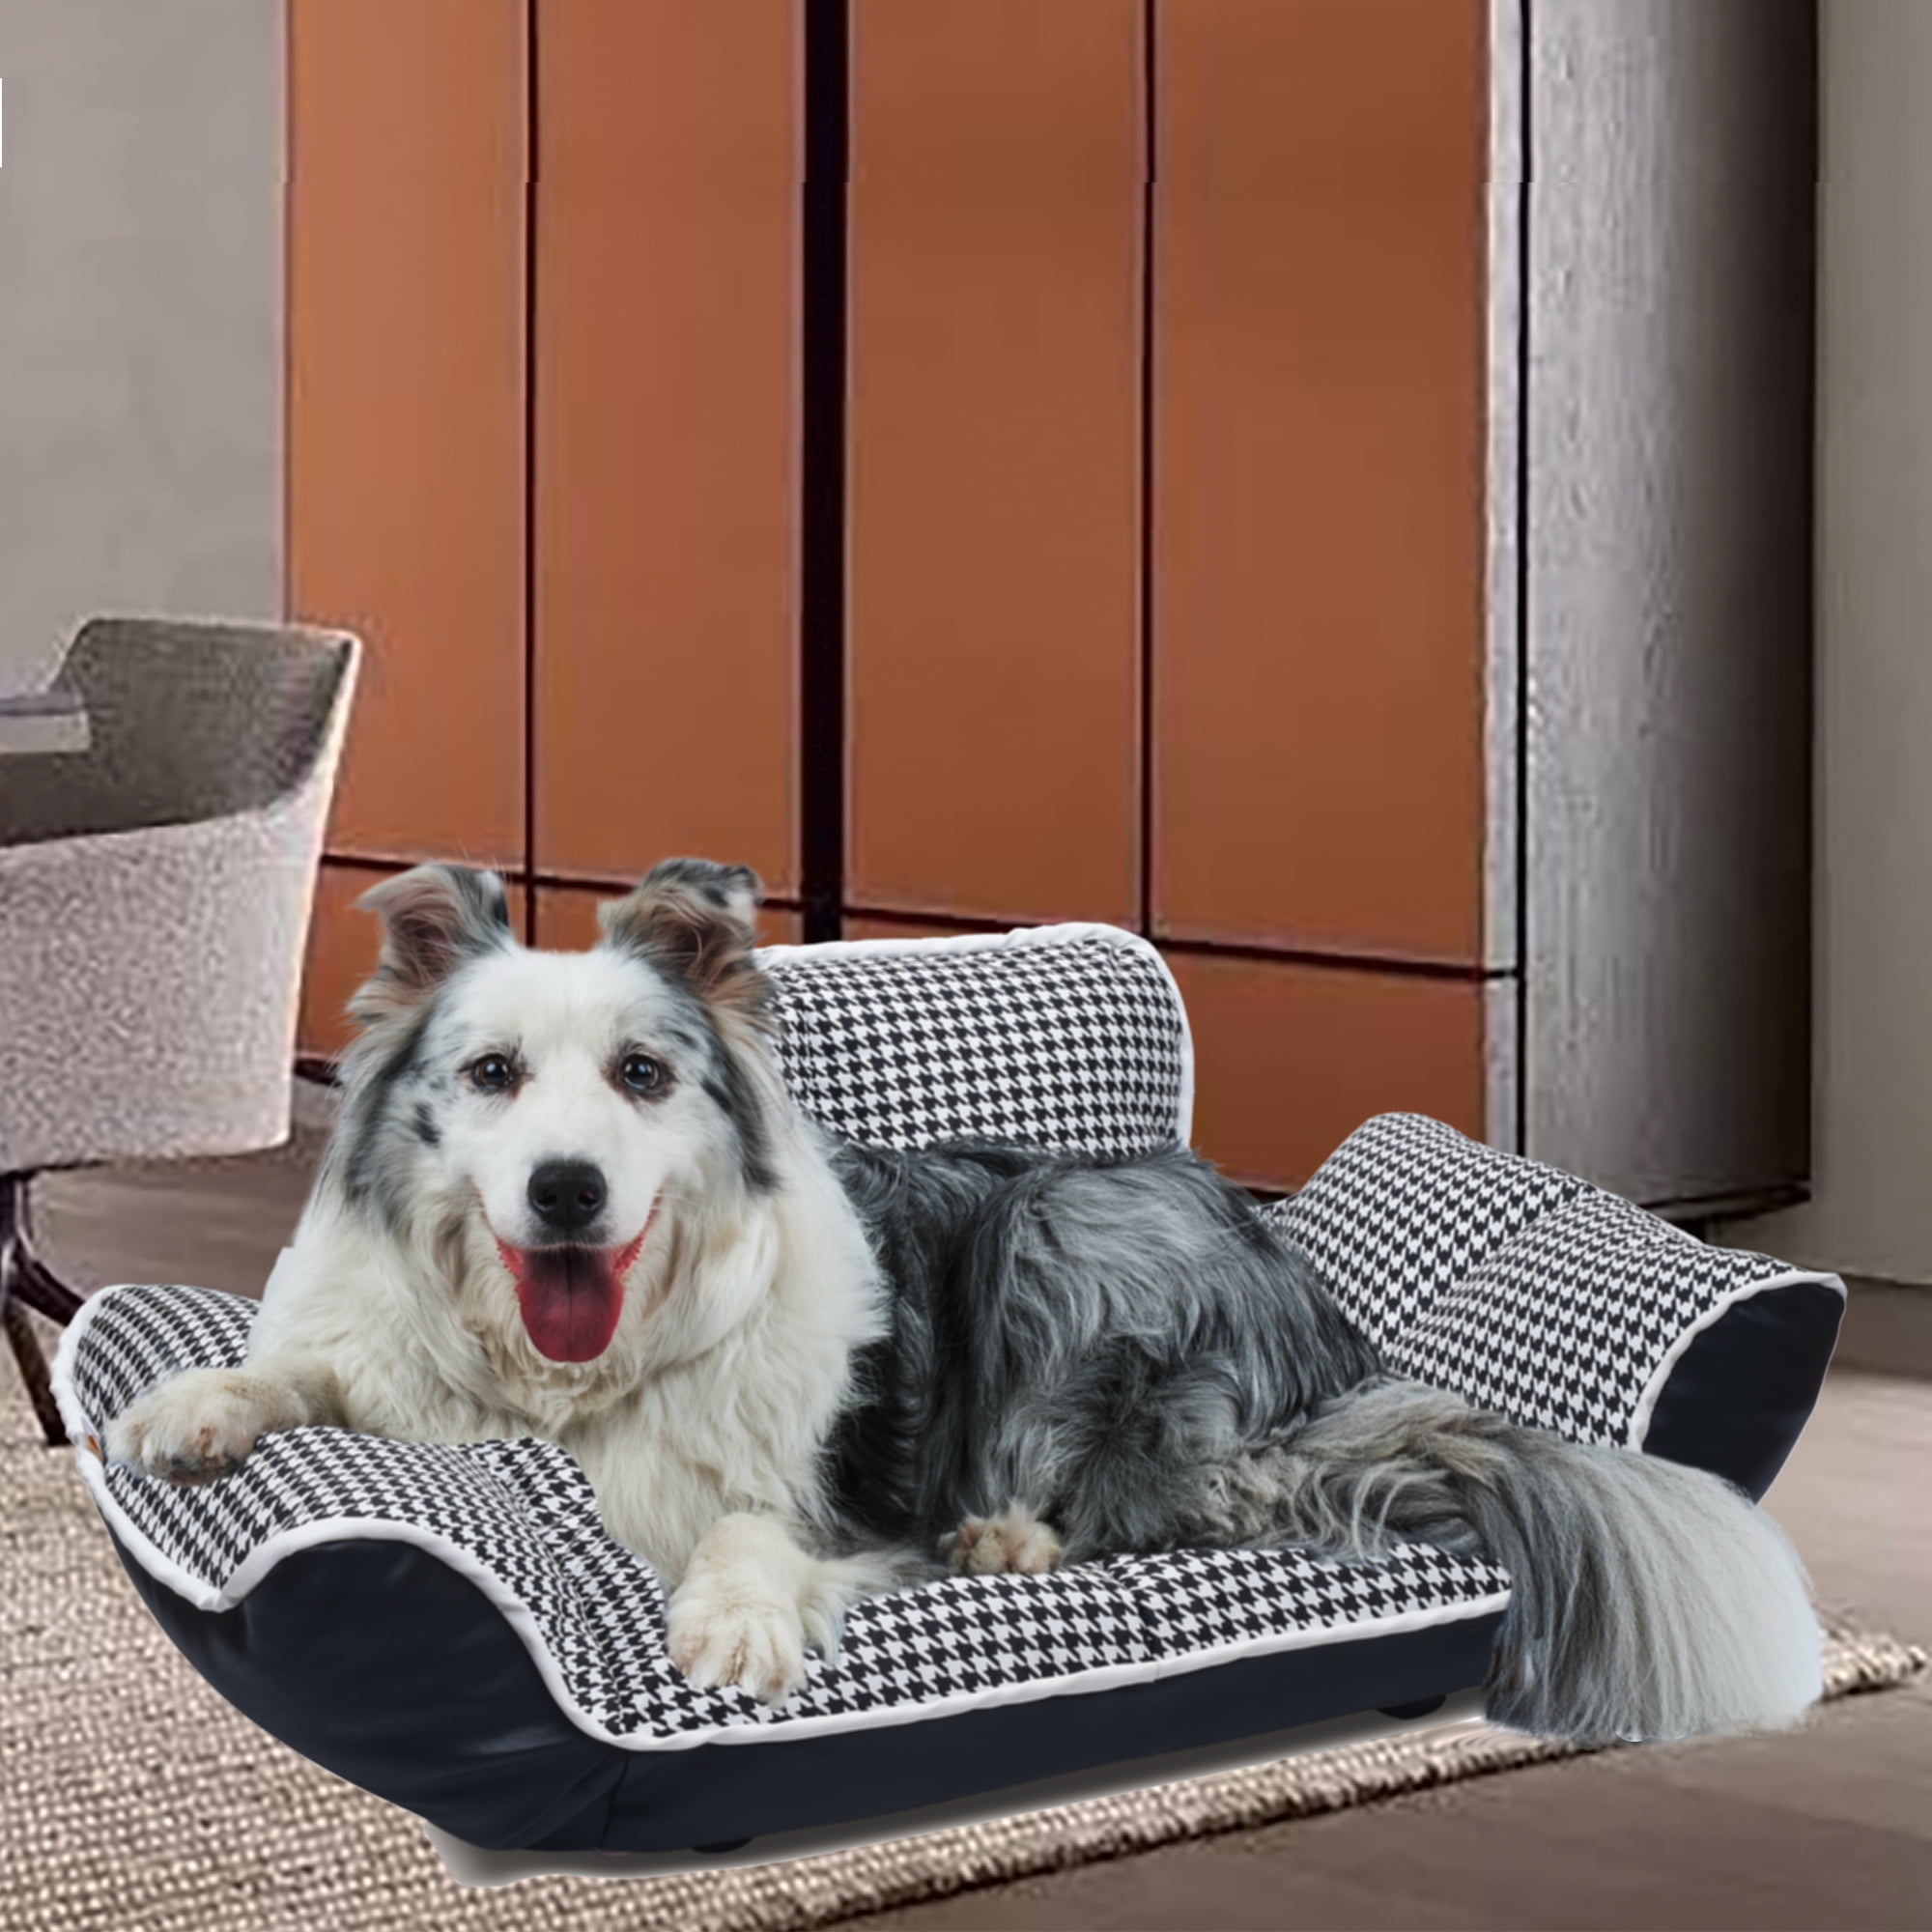 Pet Deluxe Dog Beds Large Pet Bed Orthopedic Dogs Lounge Sofa Pets Couch Beds Super Soft Cat Beds with Removable Washable Cover 